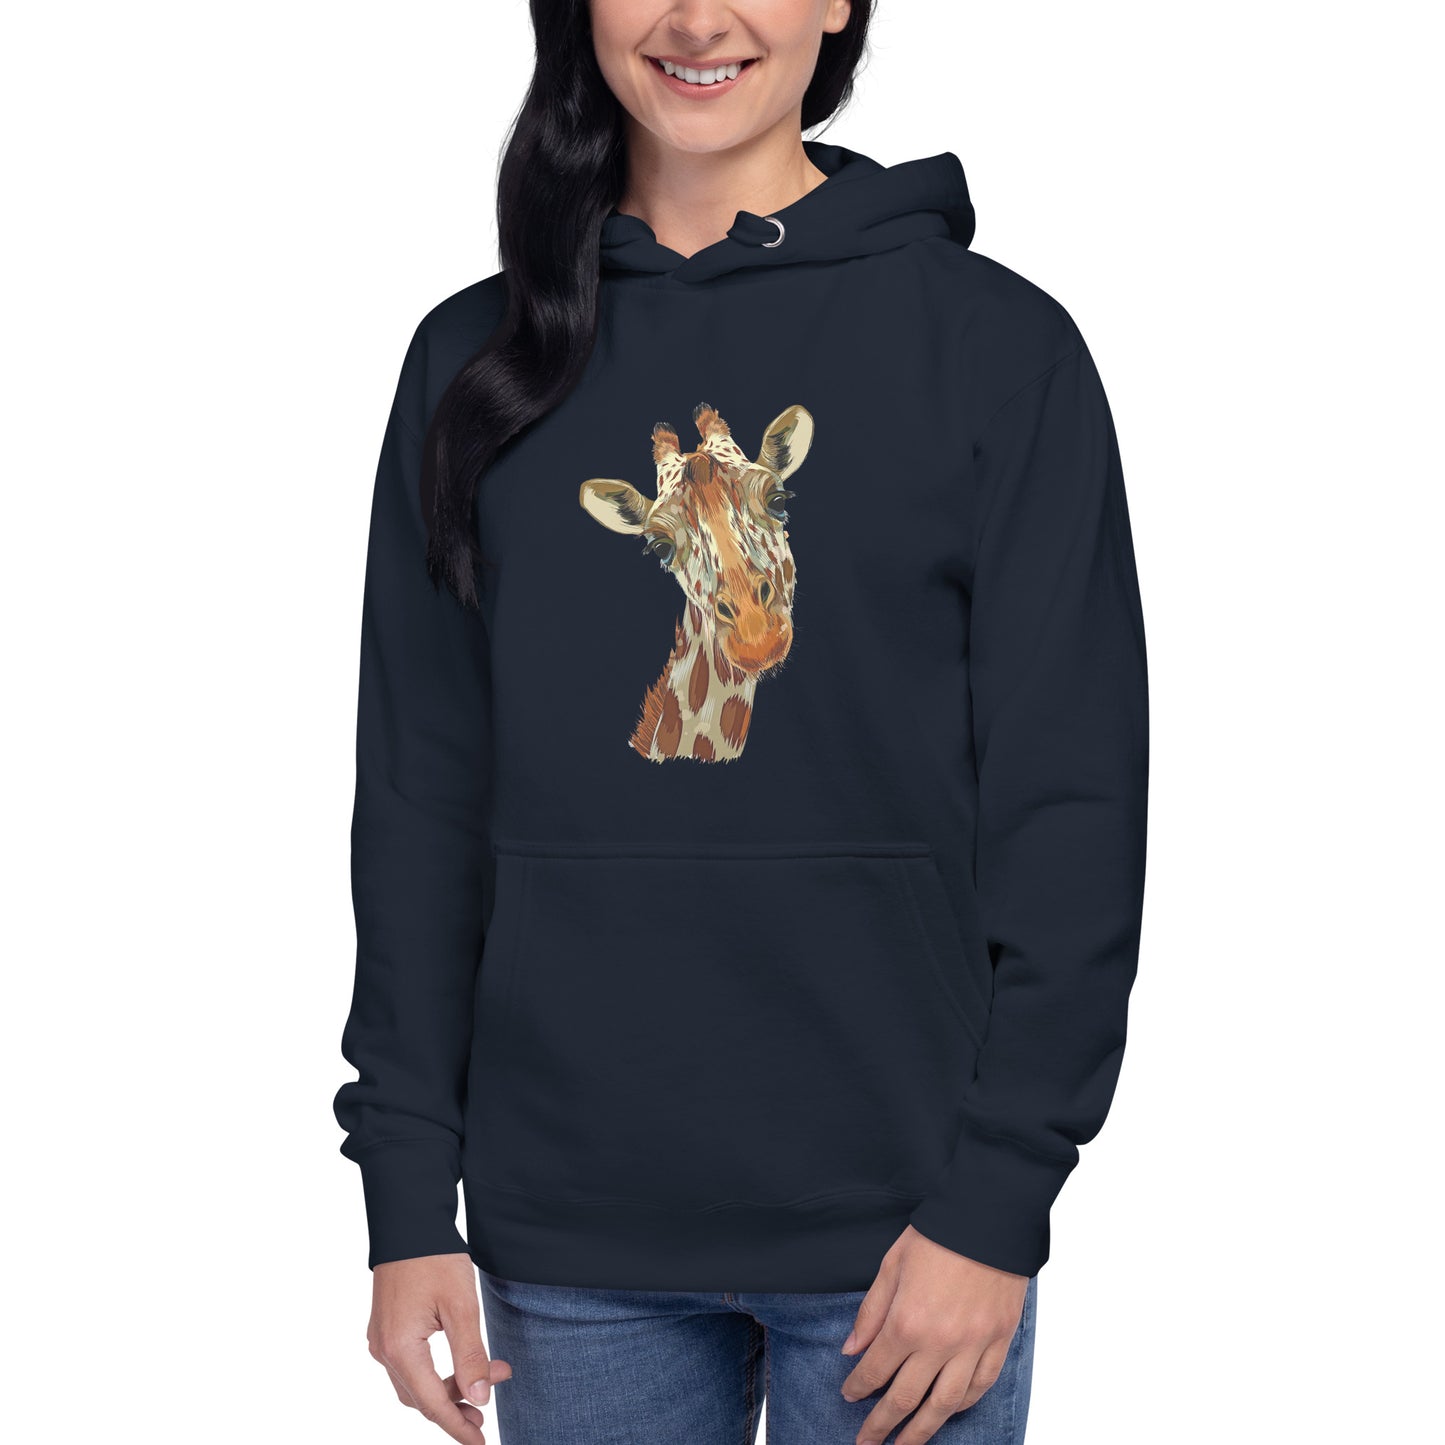 Women and Men's (Unisex) Hoodie printed with a Giraffe